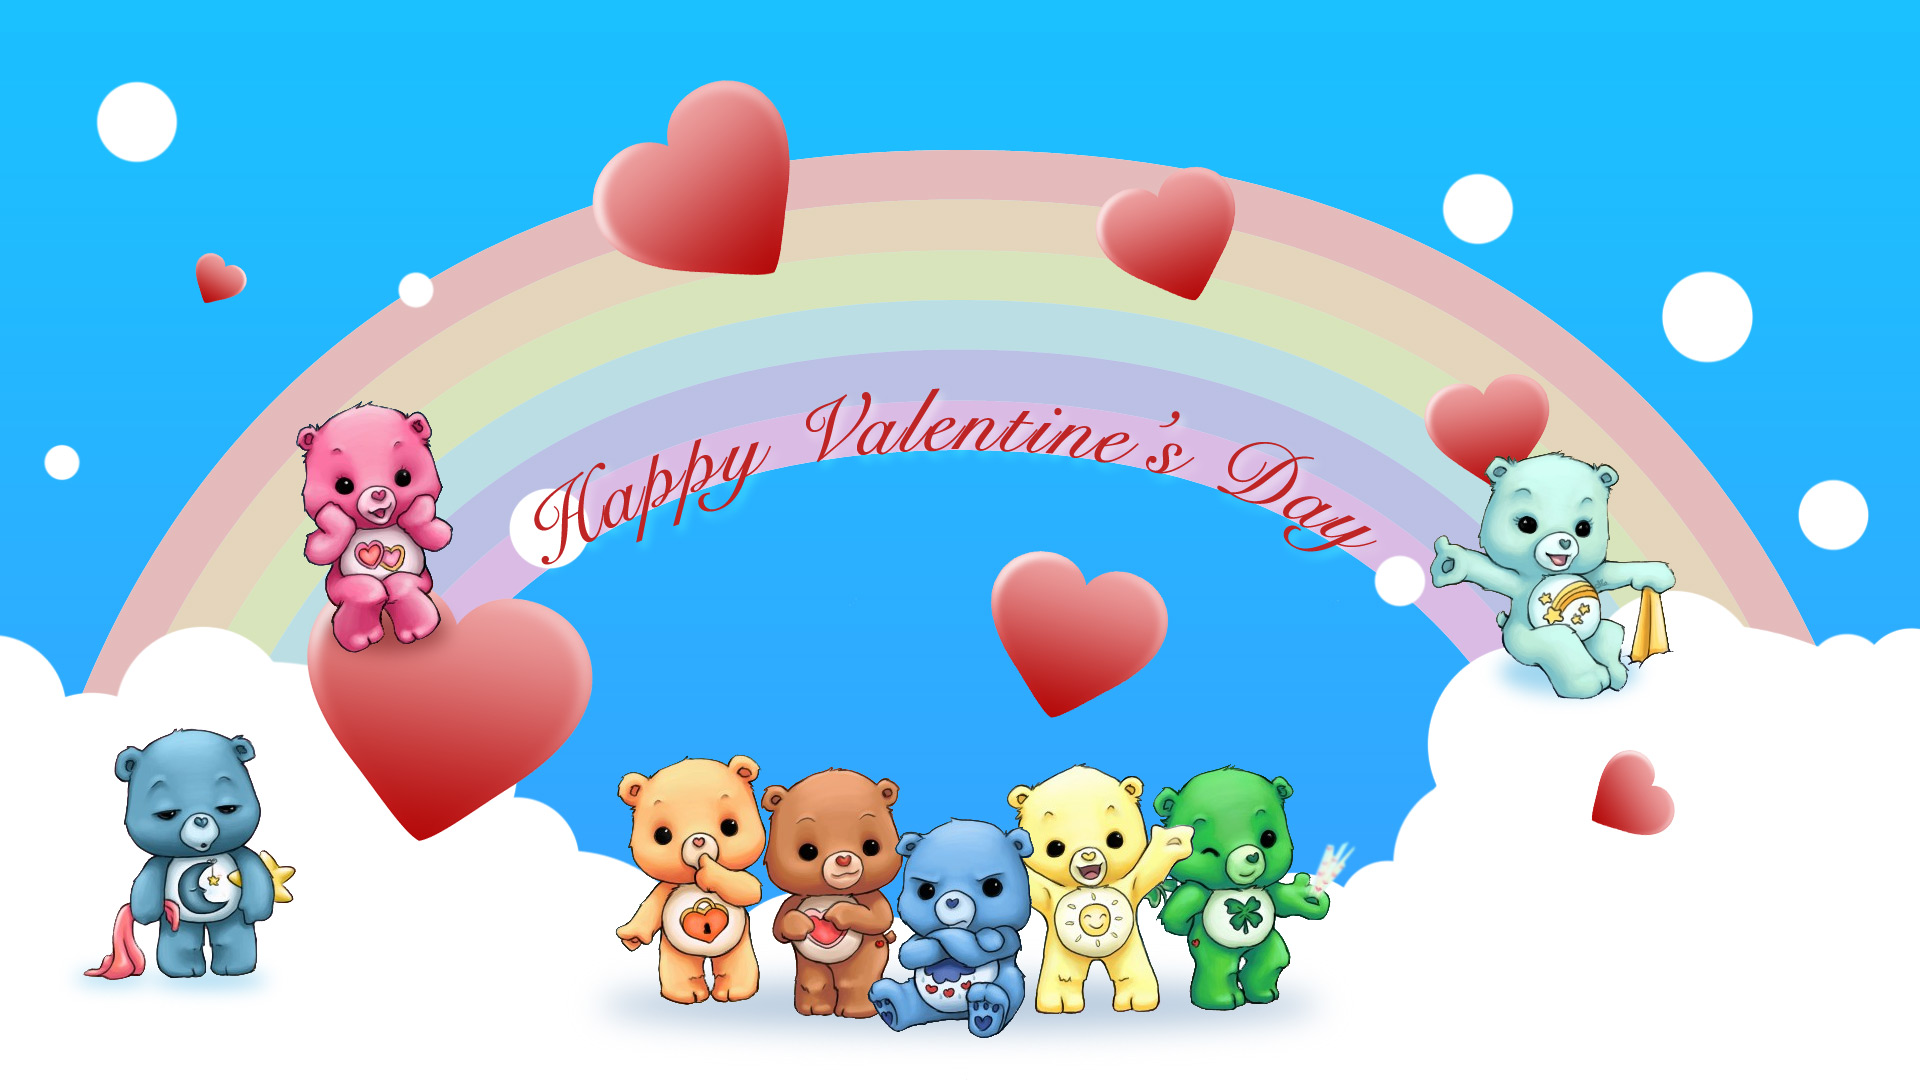 Cute Greeting Happy Valentine Day Wallpaper Desktop With